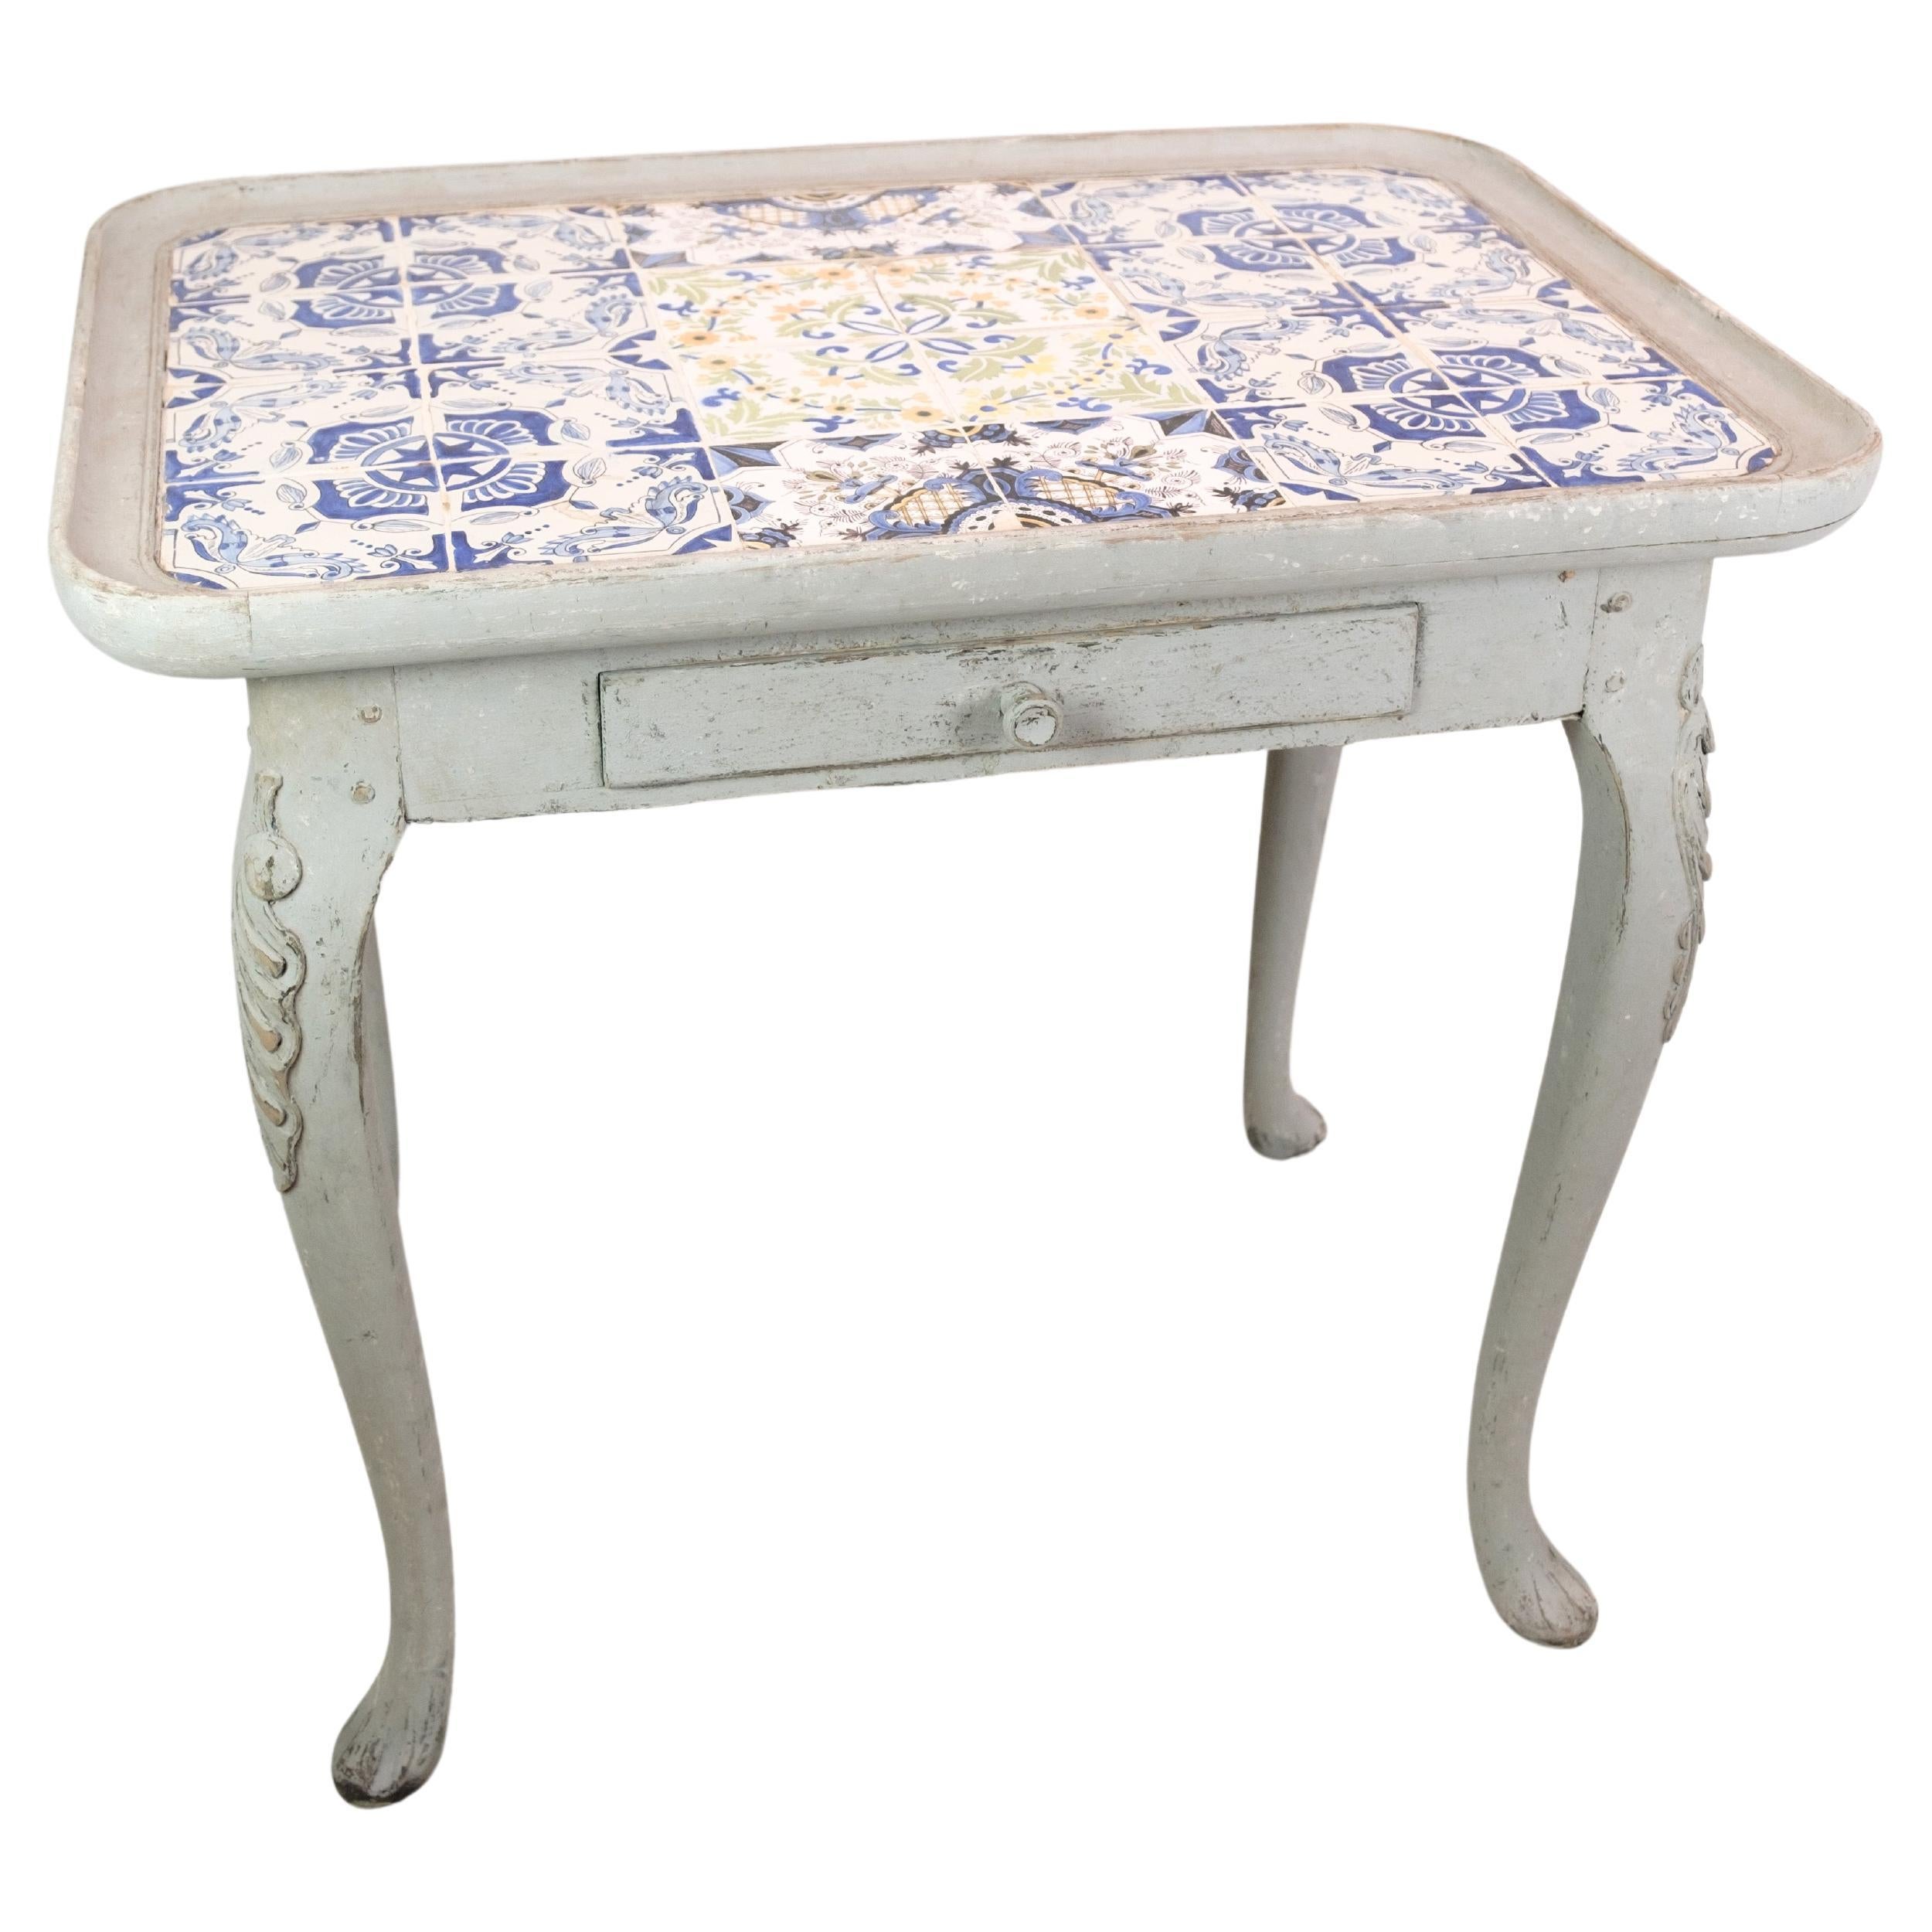 The Rococo Tile Table Painted in Grey From 1780s For Sale